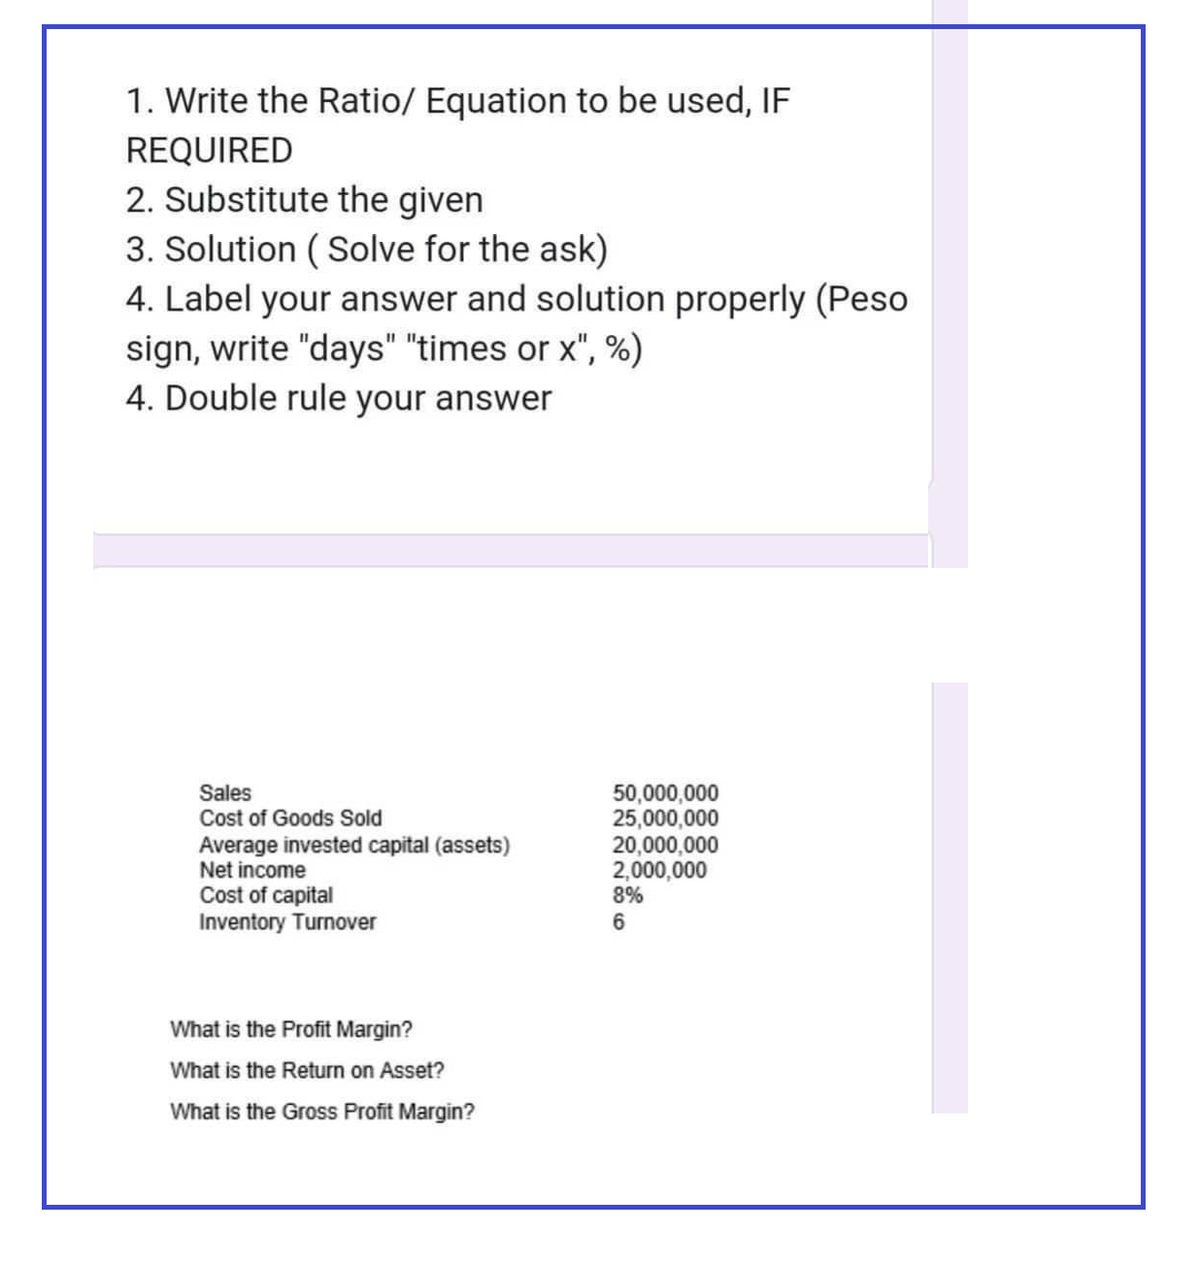 1. Write the Ratio/ Equation to be used, IF
REQUIRED
2. Substitute the given
3. Solution (Solve for the ask)
4. Label your answer and solution properly (Peso
sign, write "days" "times or x", %)
4. Double rule your answer
Sales
Cost of Goods Sold
Average invested capital (assets)
Net income
Cost of capital
Inventory Turnover
What is the Profit Margin?
What is the Return on Asset?
What is the Gross Profit Margin?
50,000,000
25,000,000
20,000,000
2,000,000
8%
6